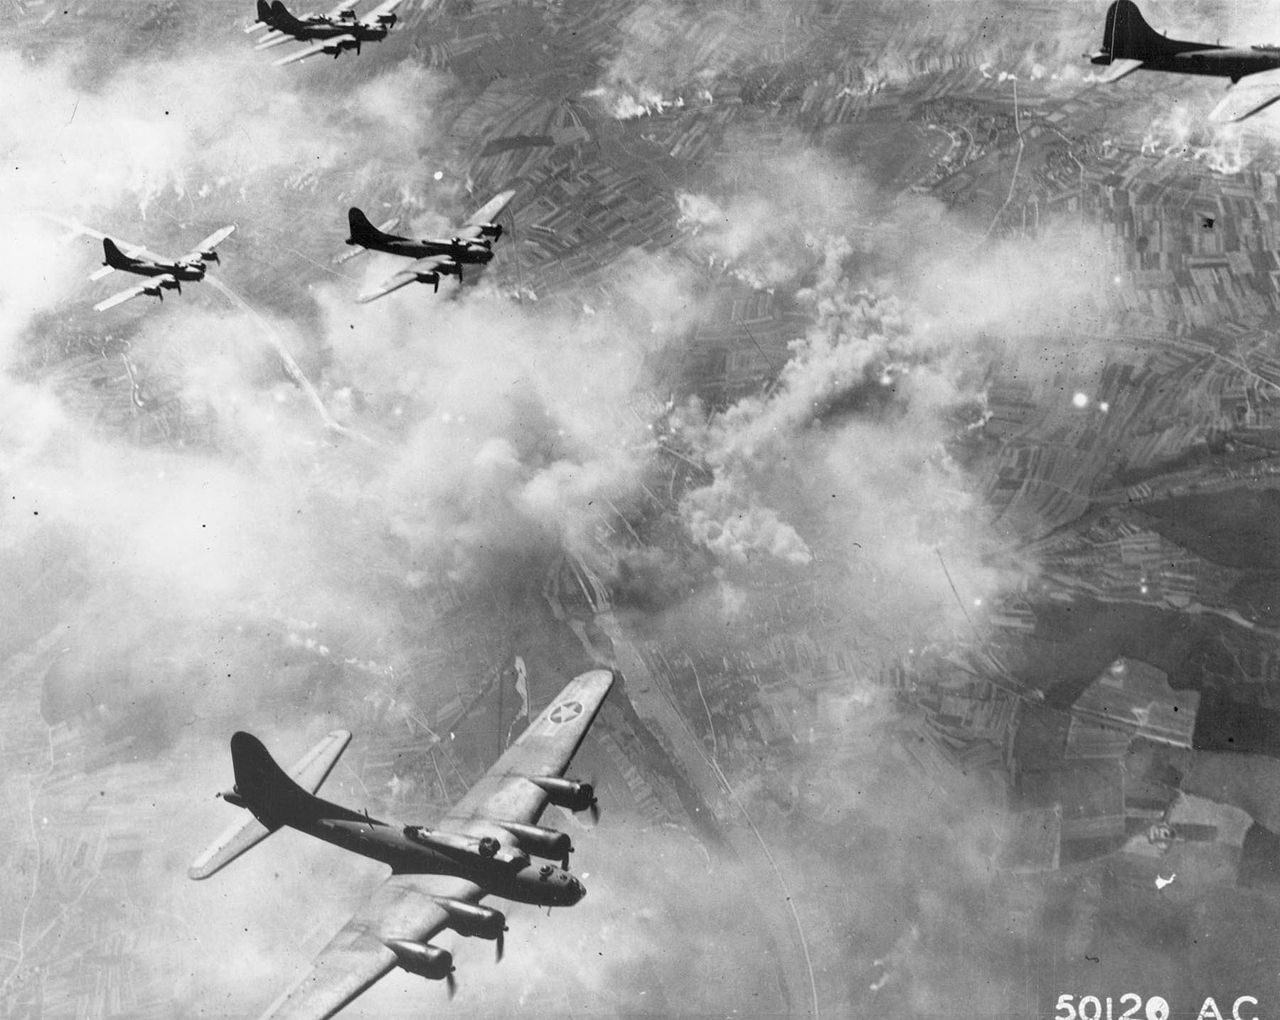 Norden Bombsight, Formation Bombing and Lead Crews: How American B-17 Bombers Hoped to Achieve Air Superiority during Long-Range Daylight Precision Bombings over Germany